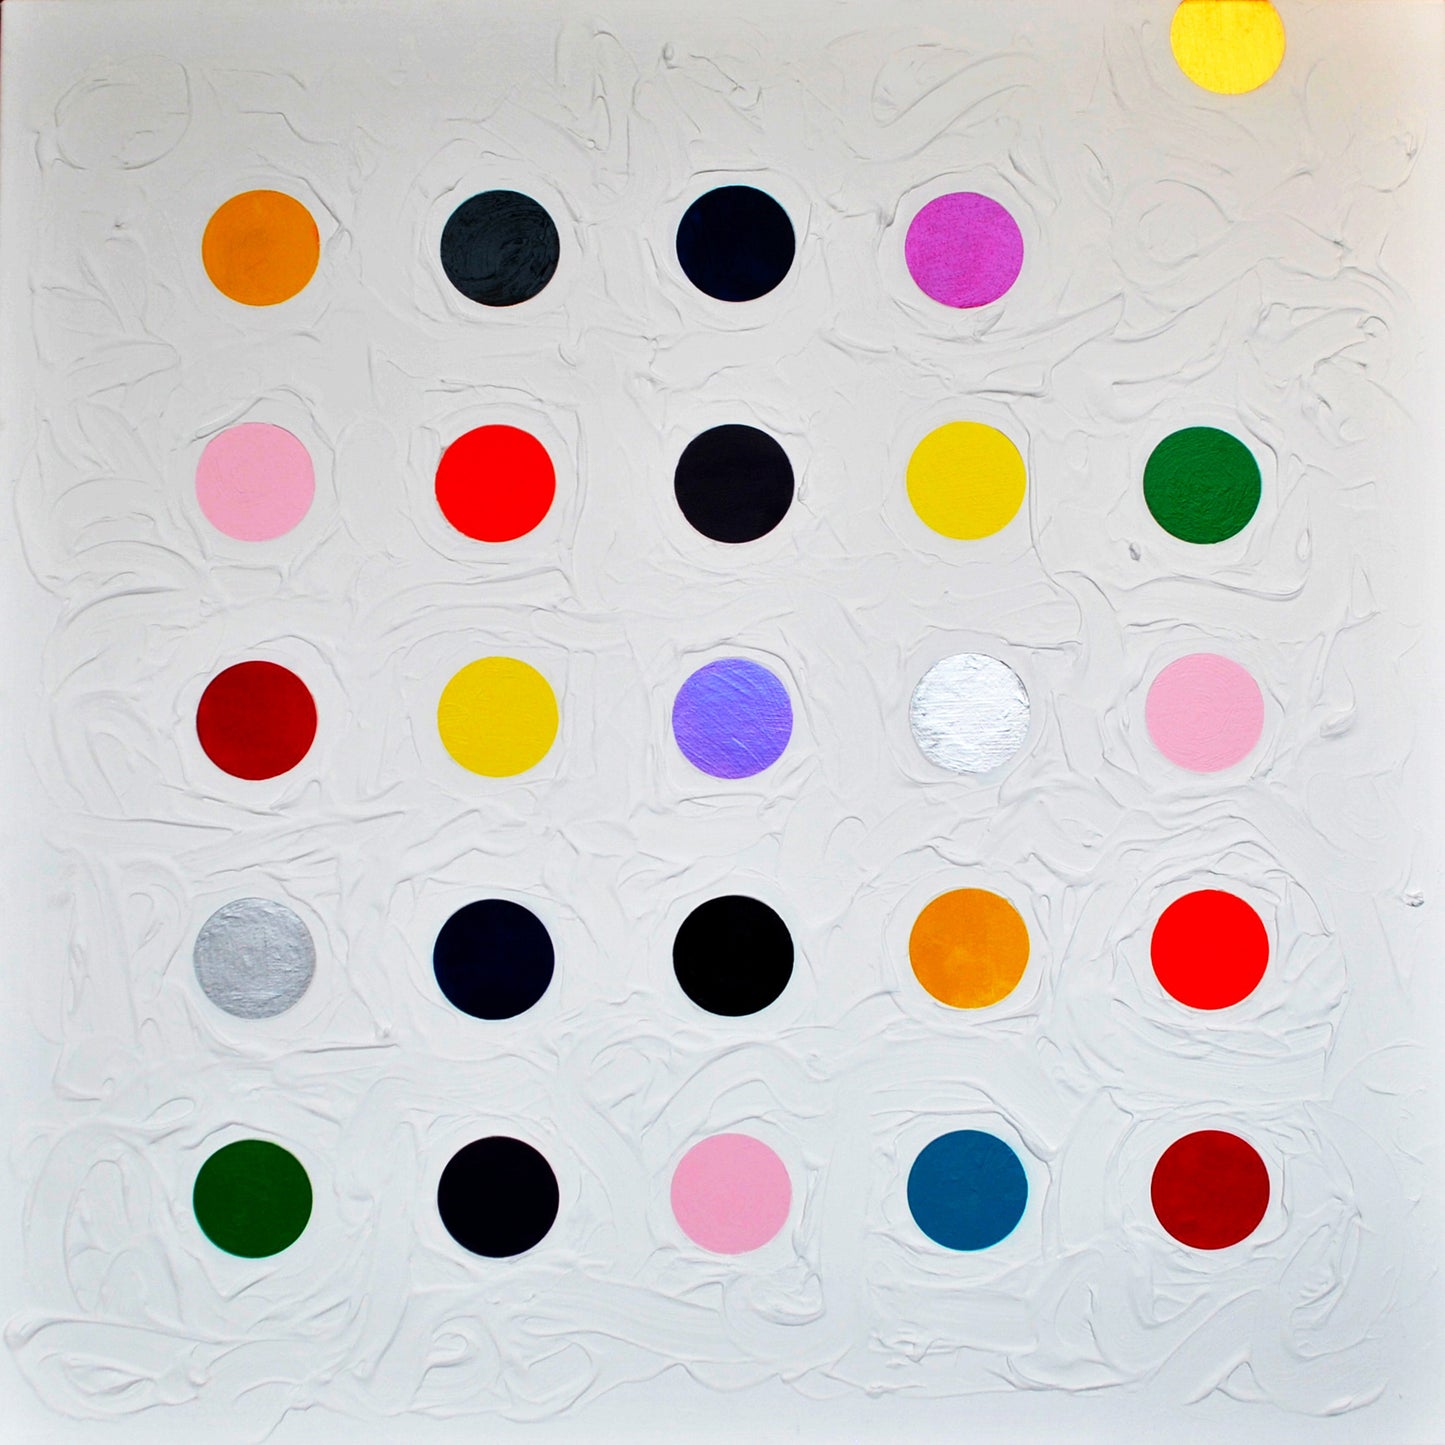 Rebel Dots by James Marshall